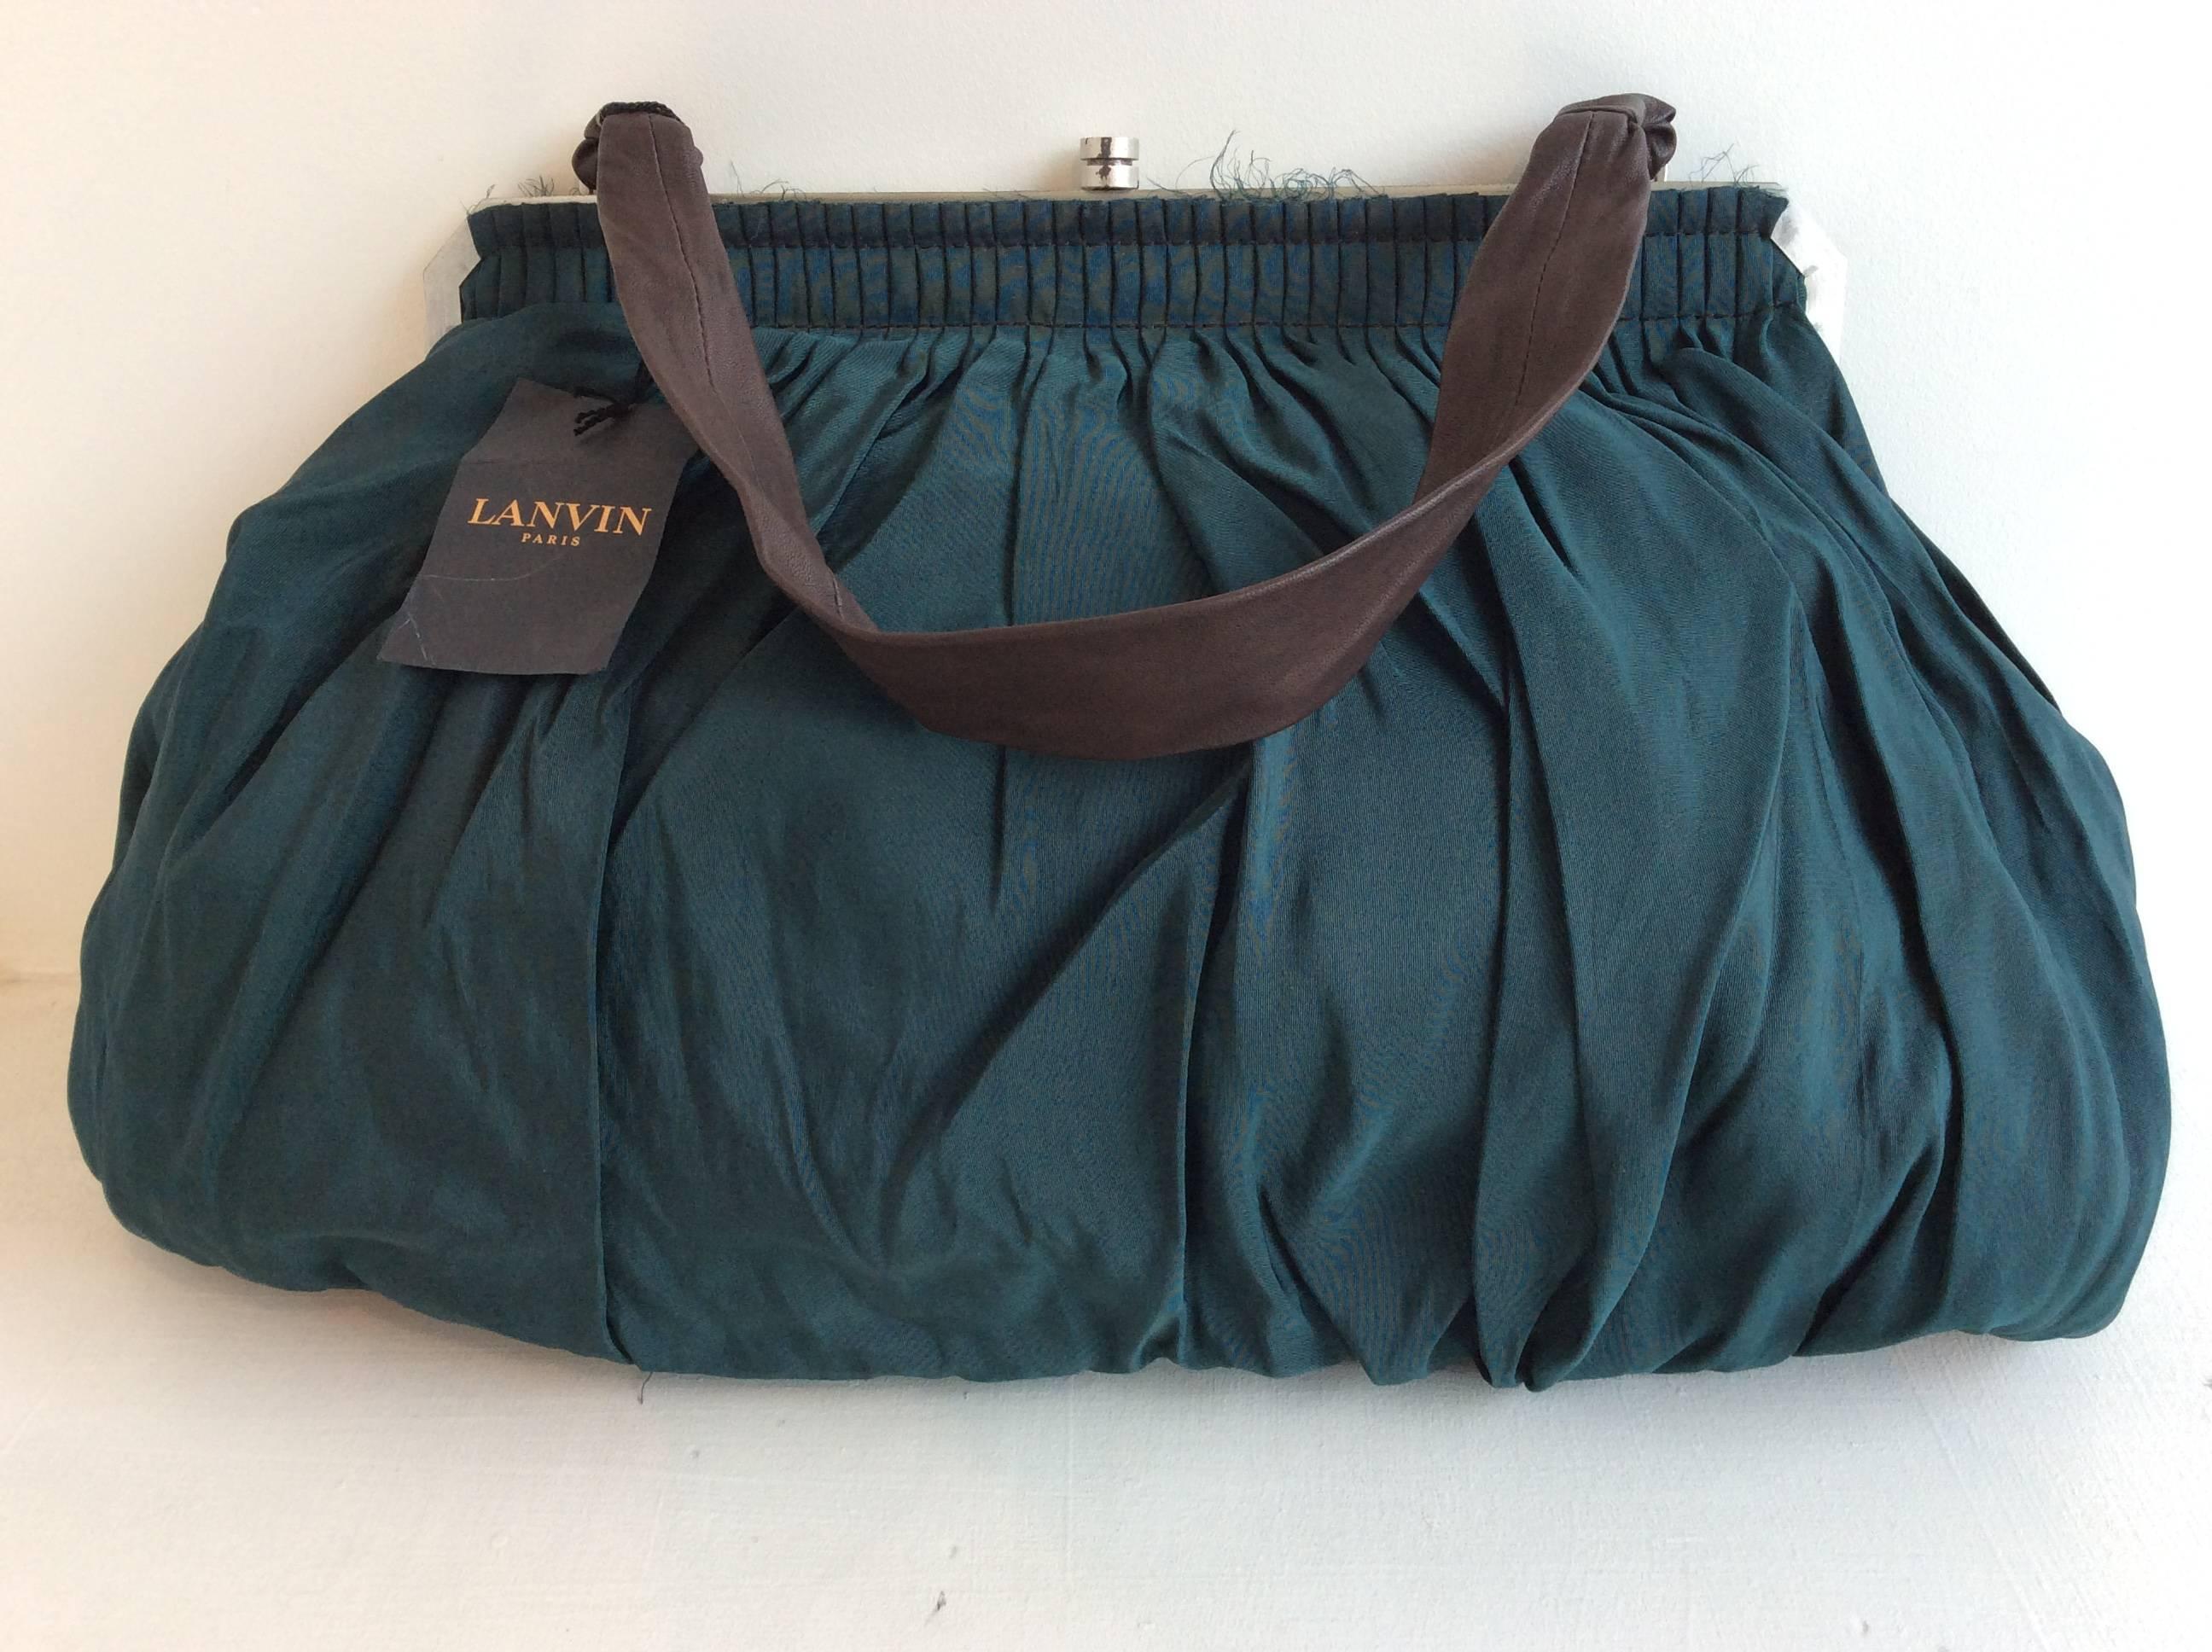 Amazing retro looking bag in forest green silk failed with unfinished seams. It has a brown single 1 1/2in wide and 21 1/2in long strap. The metal frame is muted silver. The lining is black fabric. 

Please note that the clasp has some black